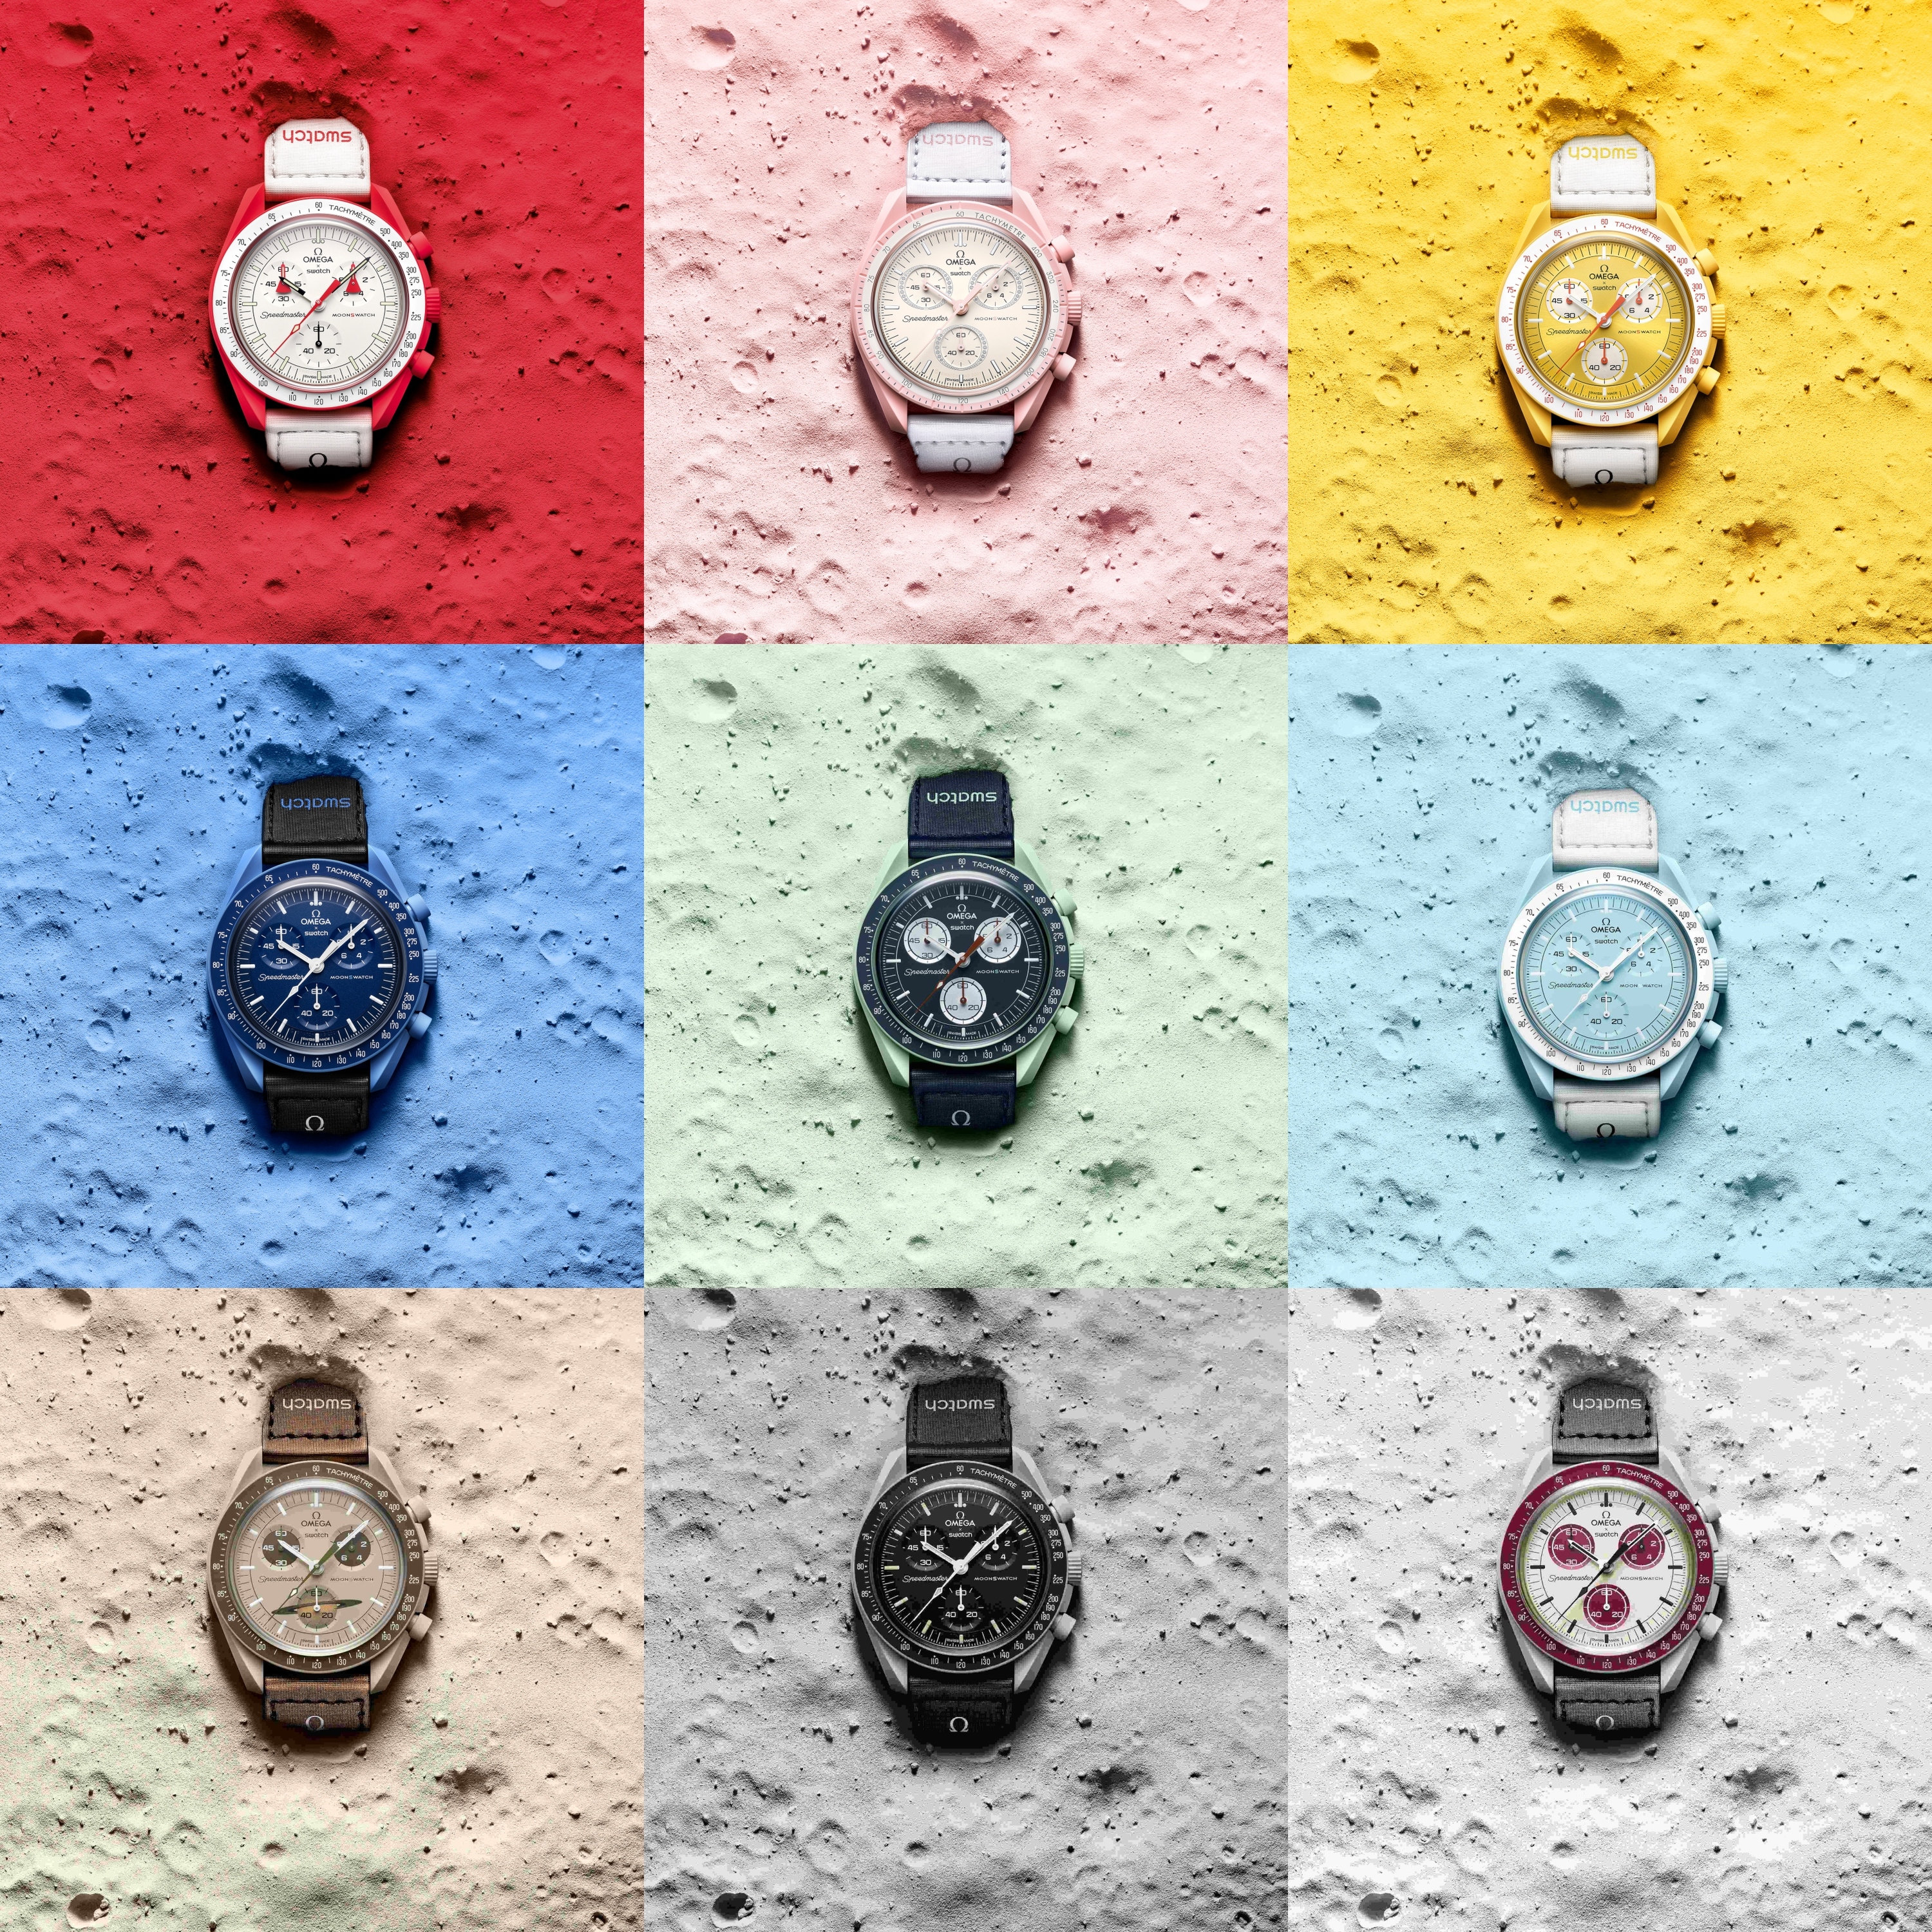 Omega x Swatch collab sparks shopping frenzy